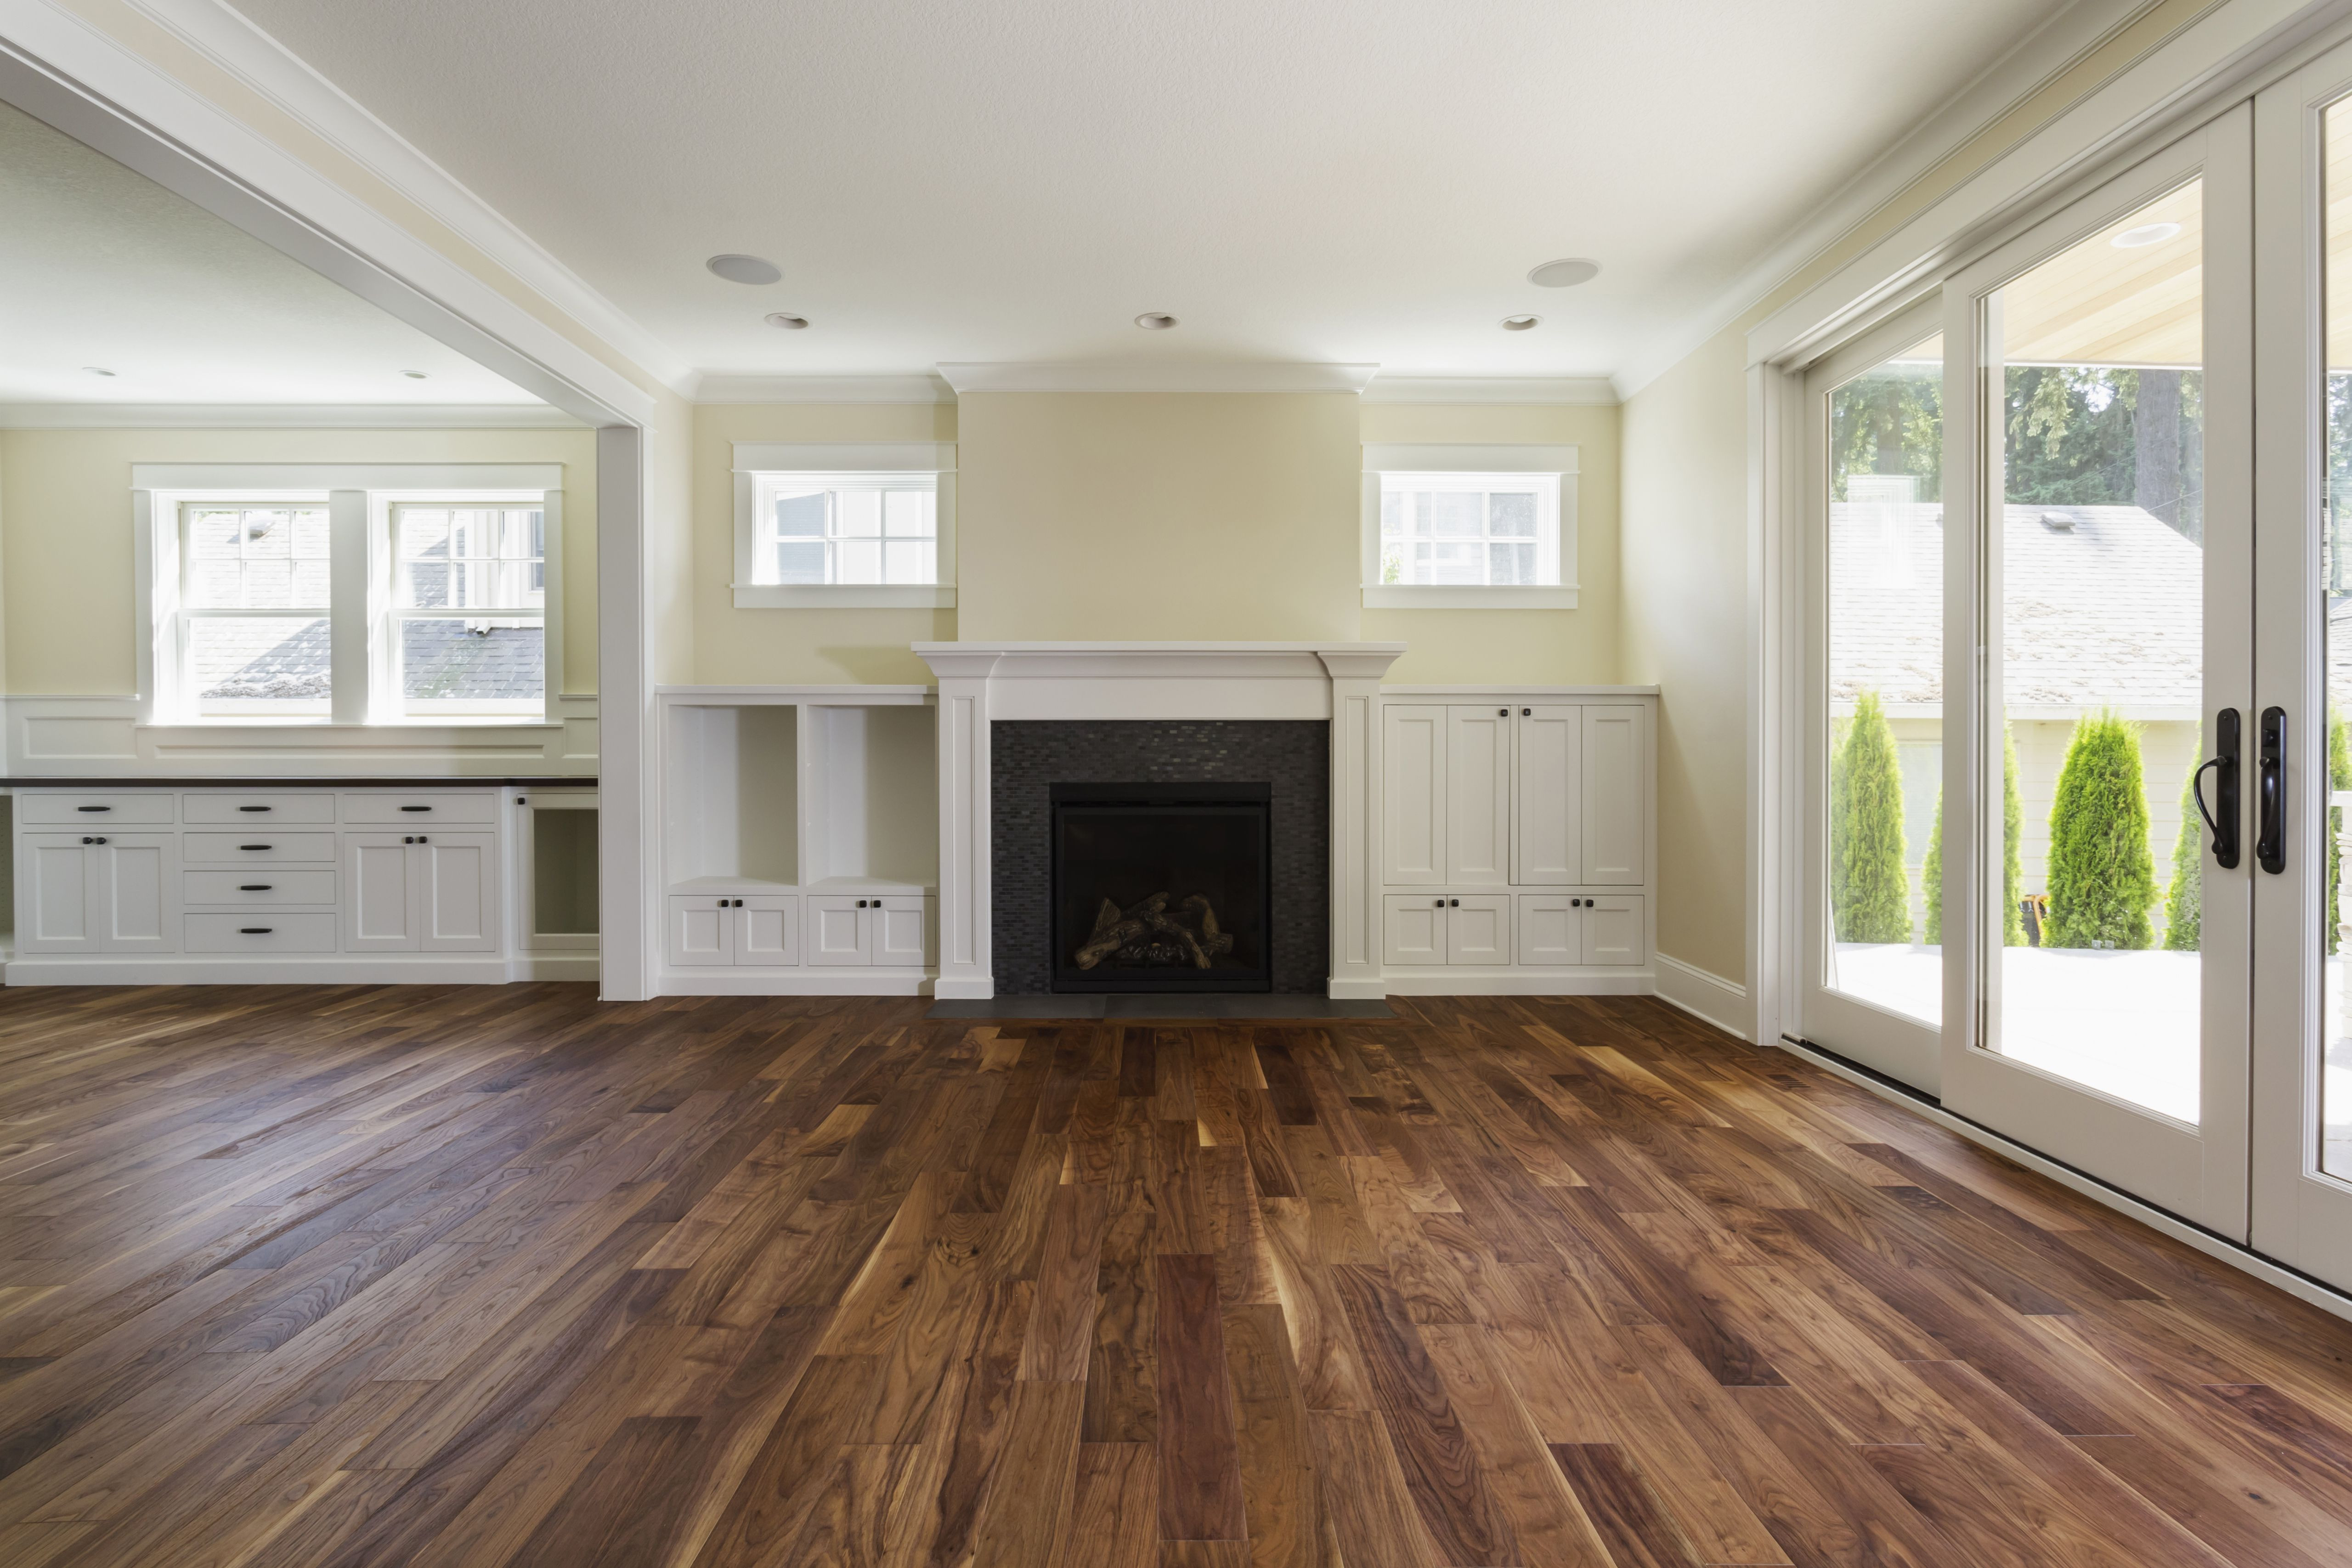 bruce hardwood floor warranty of the pros and cons of prefinished hardwood flooring within fireplace and built in shelves in living room 482143011 57bef8e33df78cc16e035397